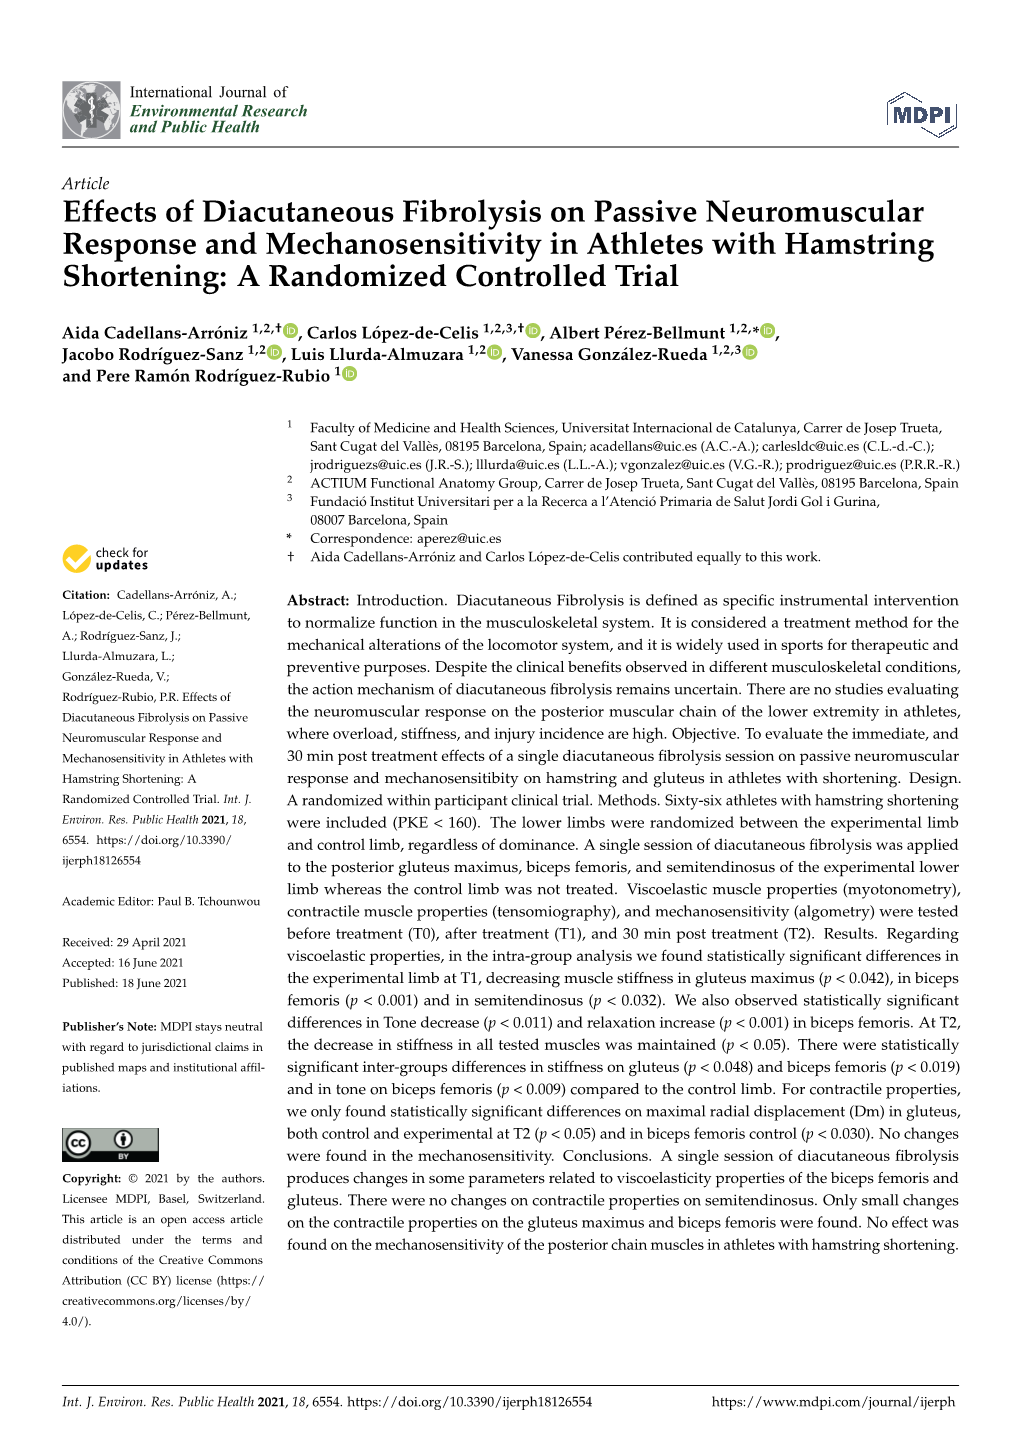 Effects of Diacutaneous Fibrolysis on Passive Neuromuscular Response and Mechanosensitivity in Athletes with Hamstring Shortening: a Randomized Controlled Trial